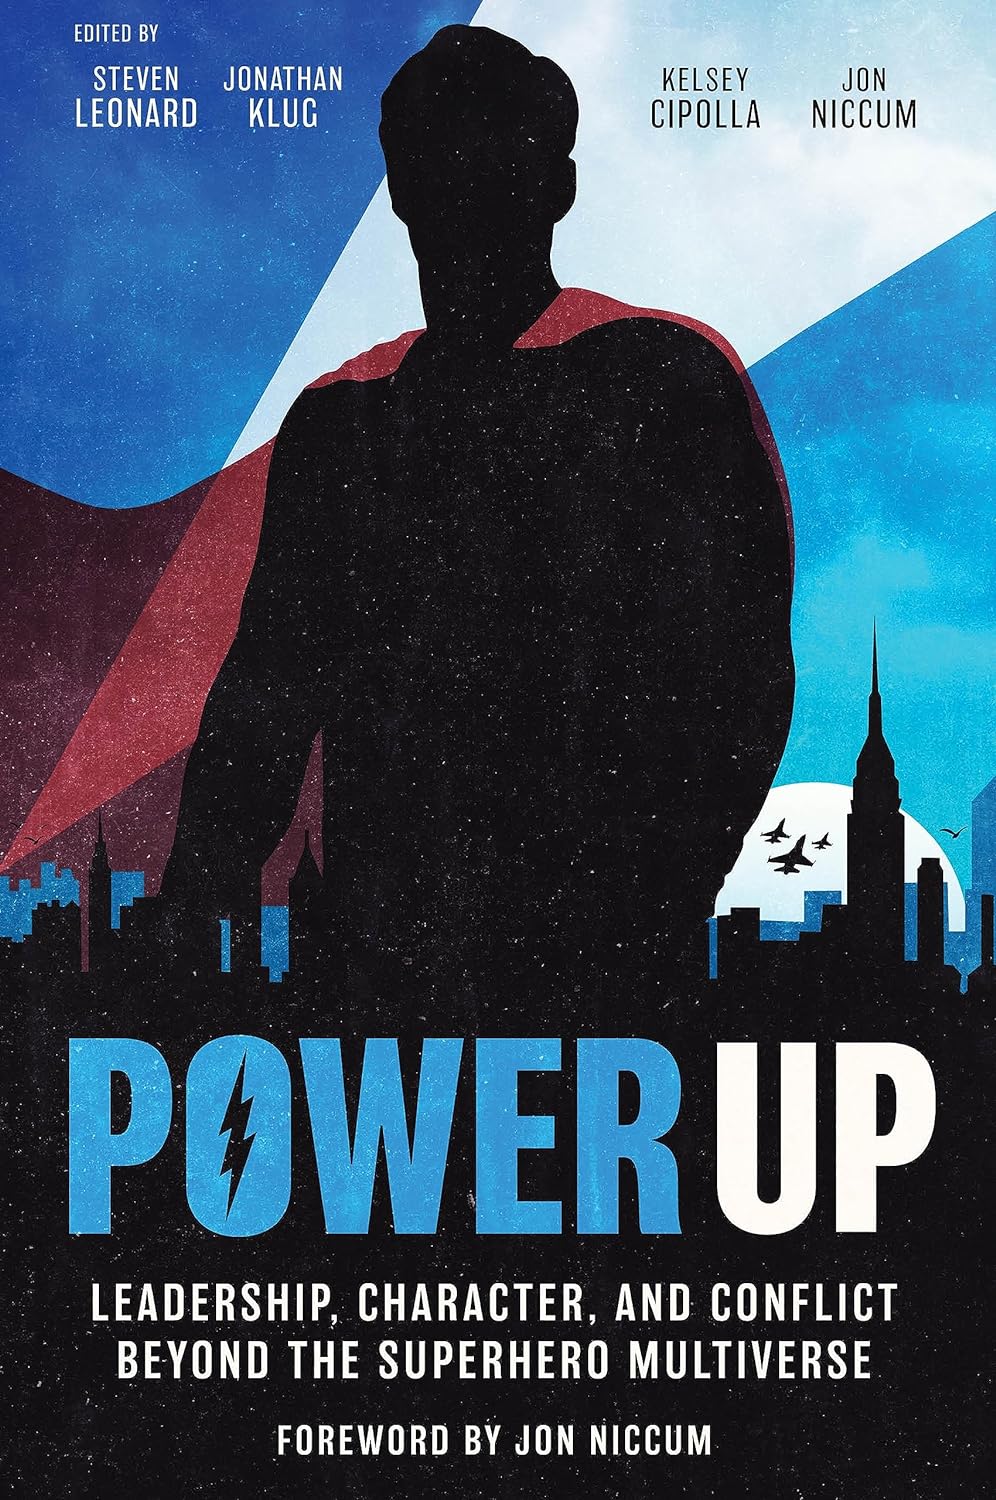 Power Up: Leadership, Character, and Conflict Beyond the Superhero Multiverse.